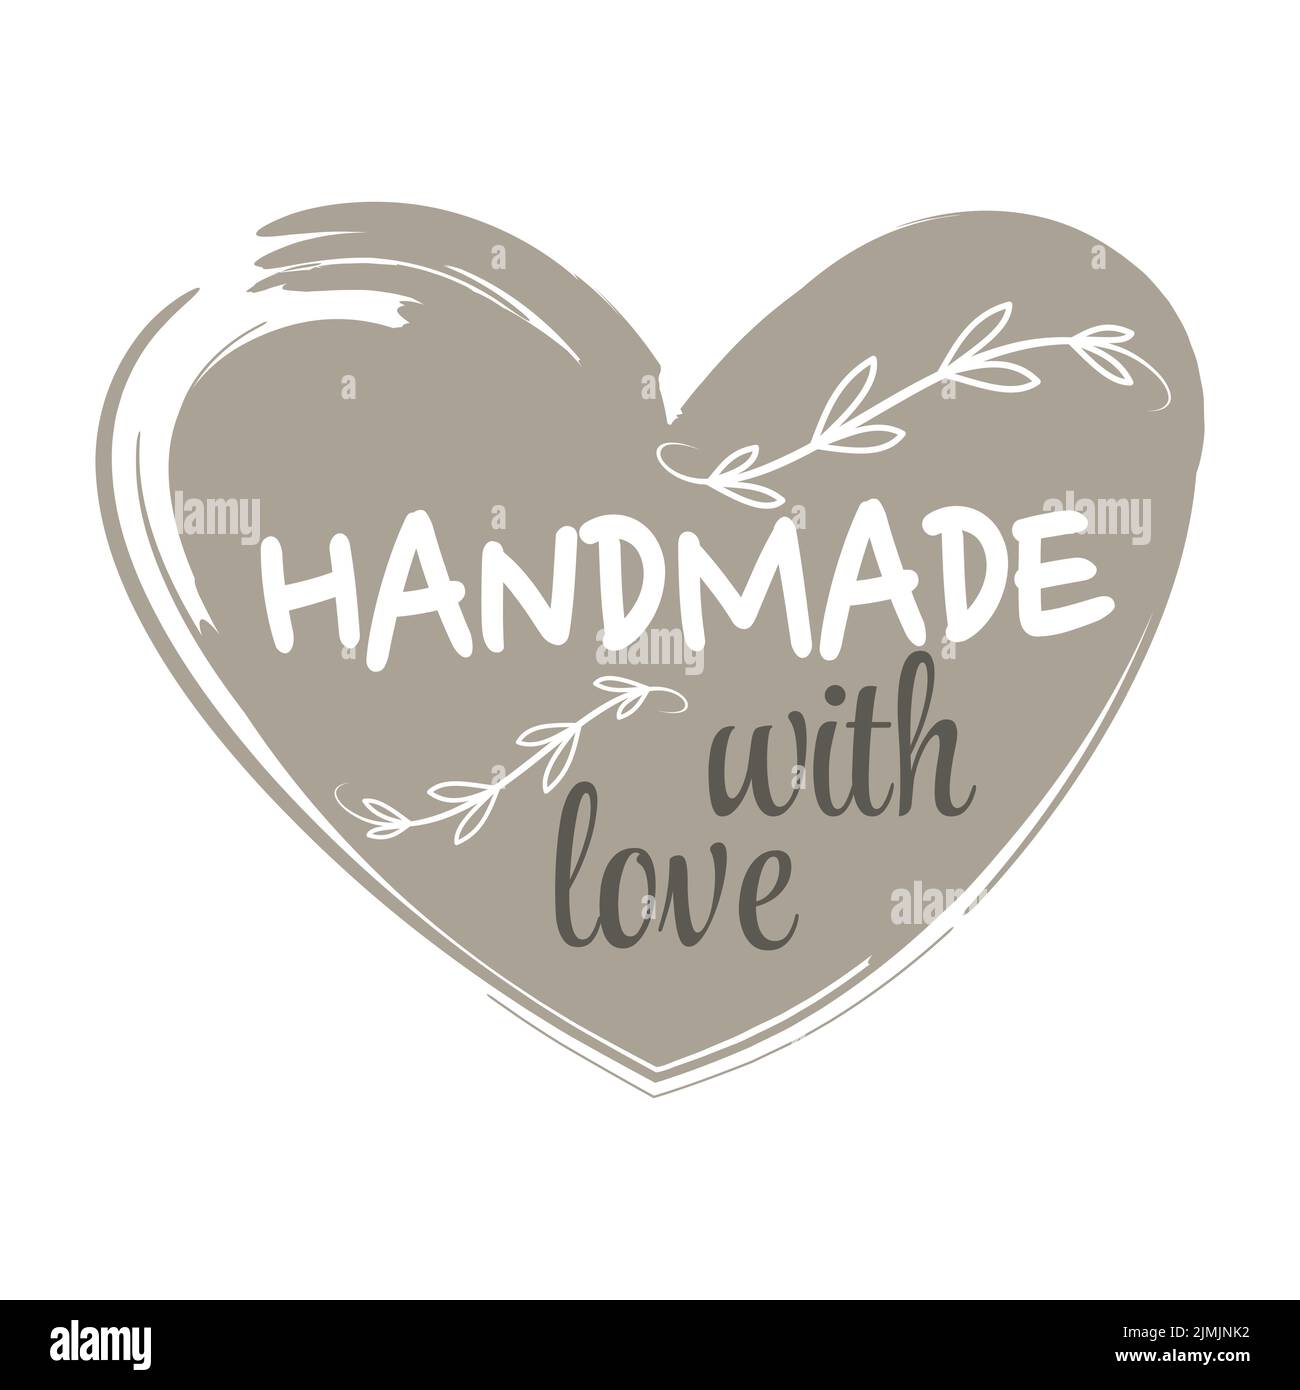 Hand made grunge heart label. Handmade with love lettering stamp, dry brush vector. Stock Vector